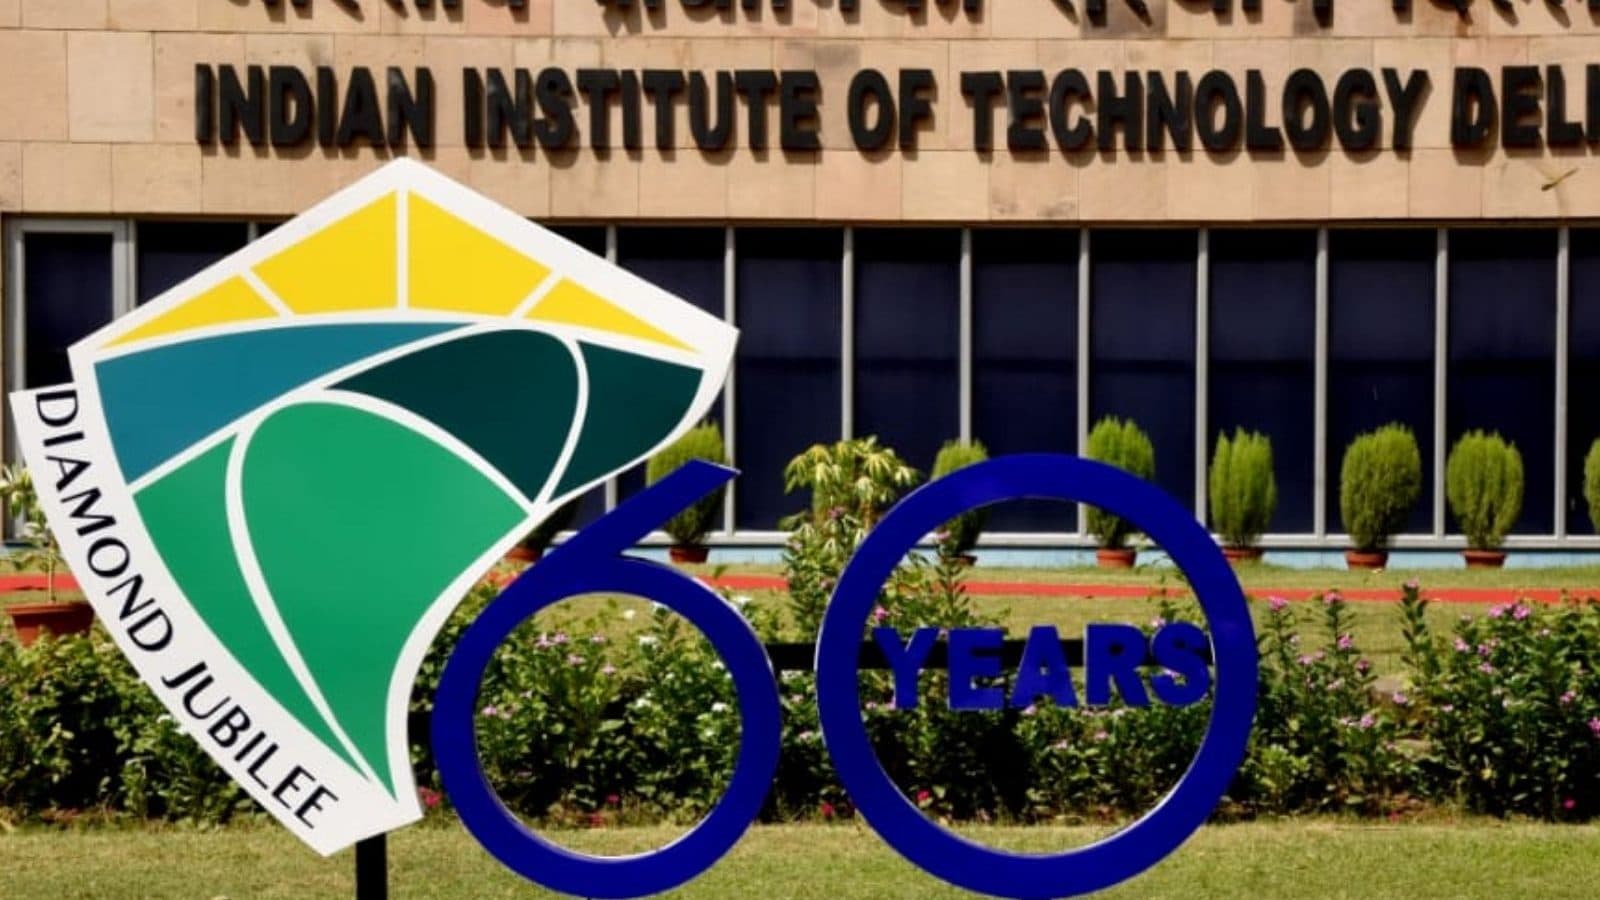 IIT Delhi Launches Fundraising Campaign to Strengthen Teaching & Research